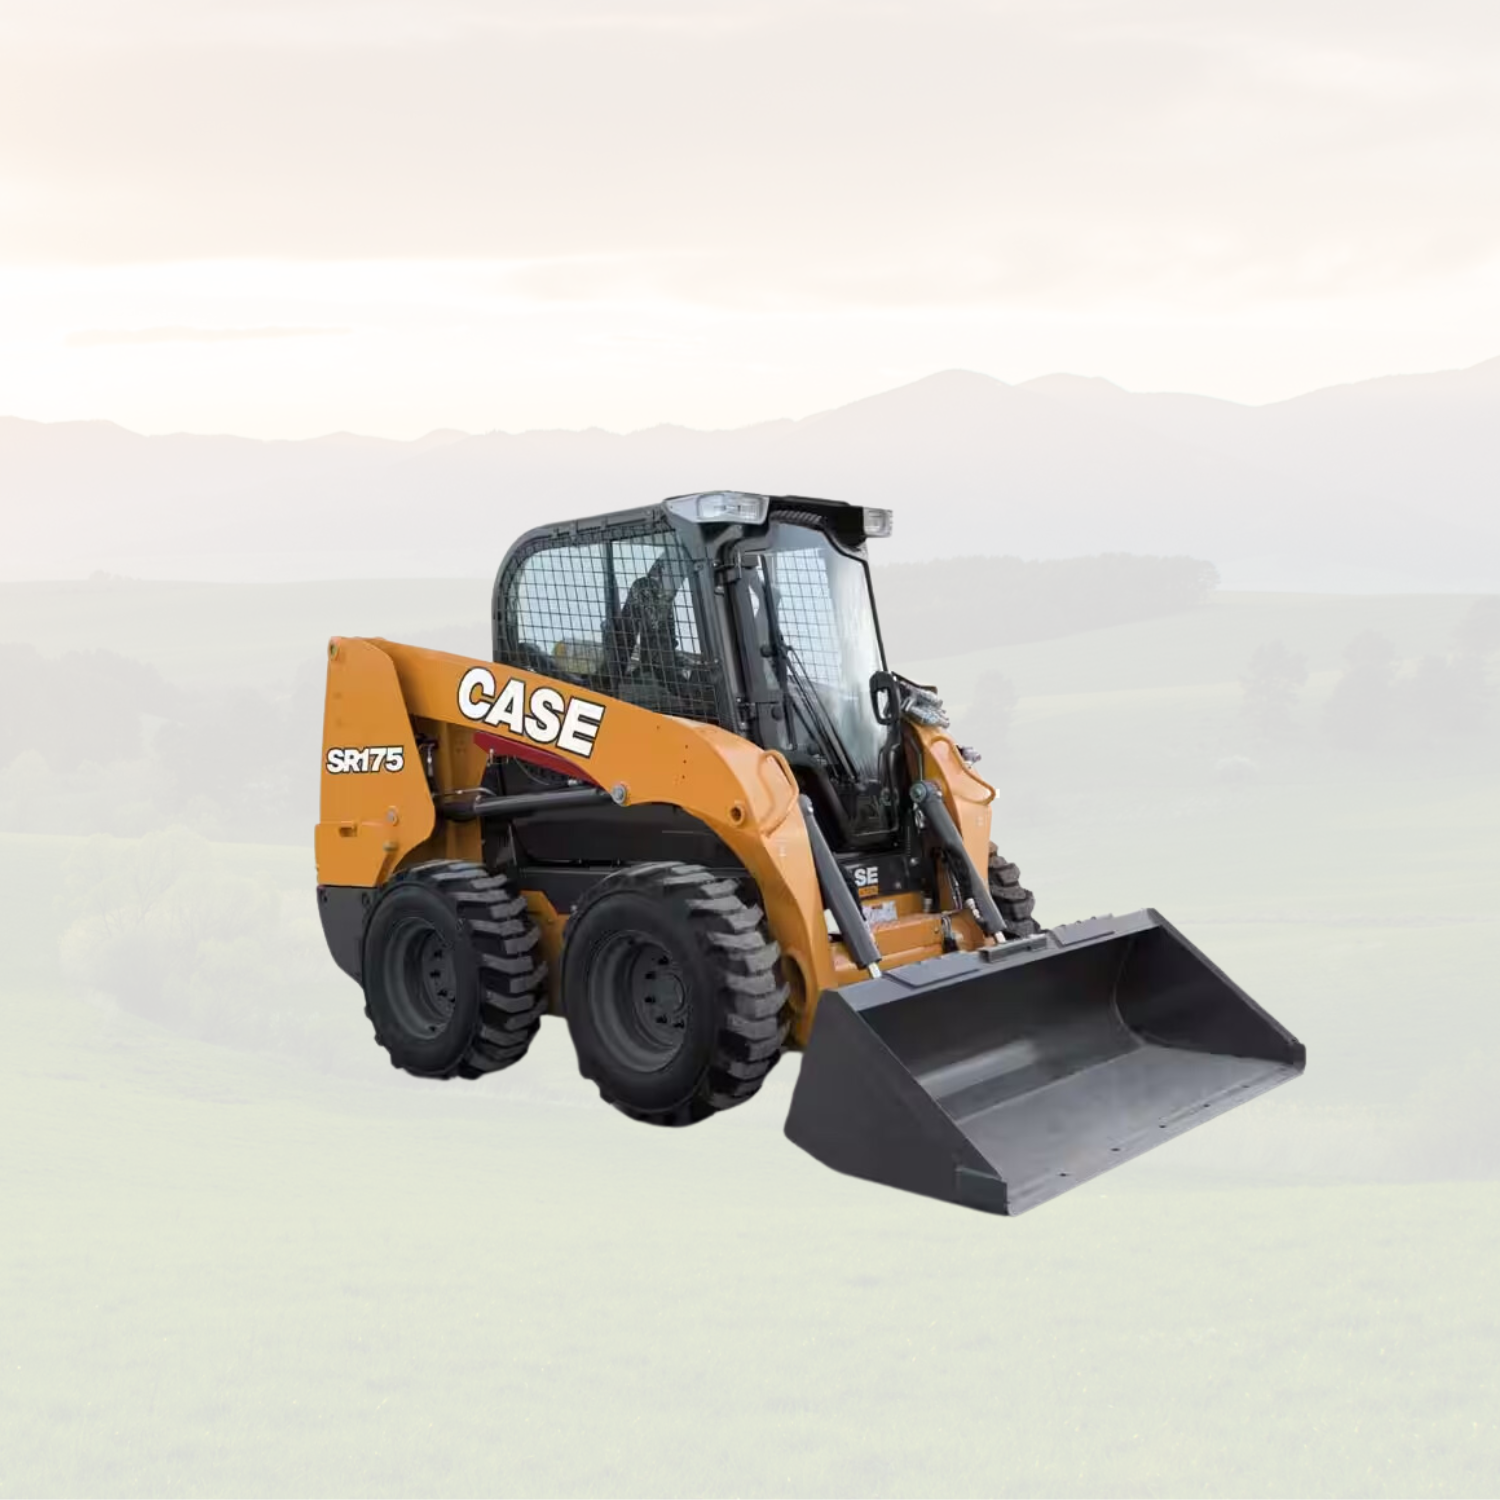 Save big on parts for your Case Agricultural & Construction Equipment